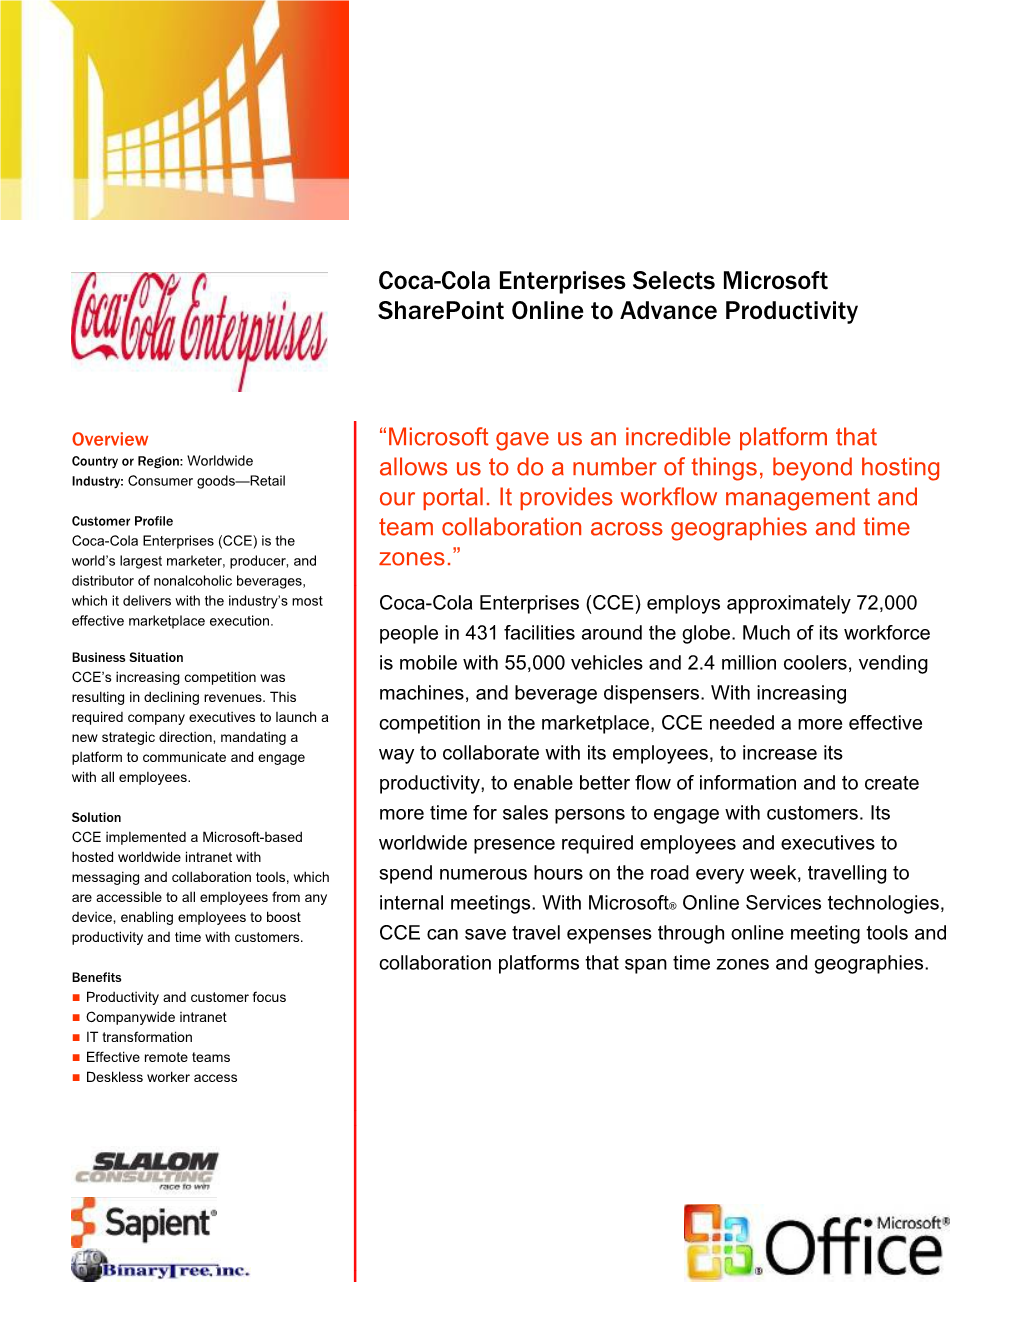 Coca-Cola Enterprises (NYSE: CCE ) Is the World's Largest Marketer, Producer, and Distributor